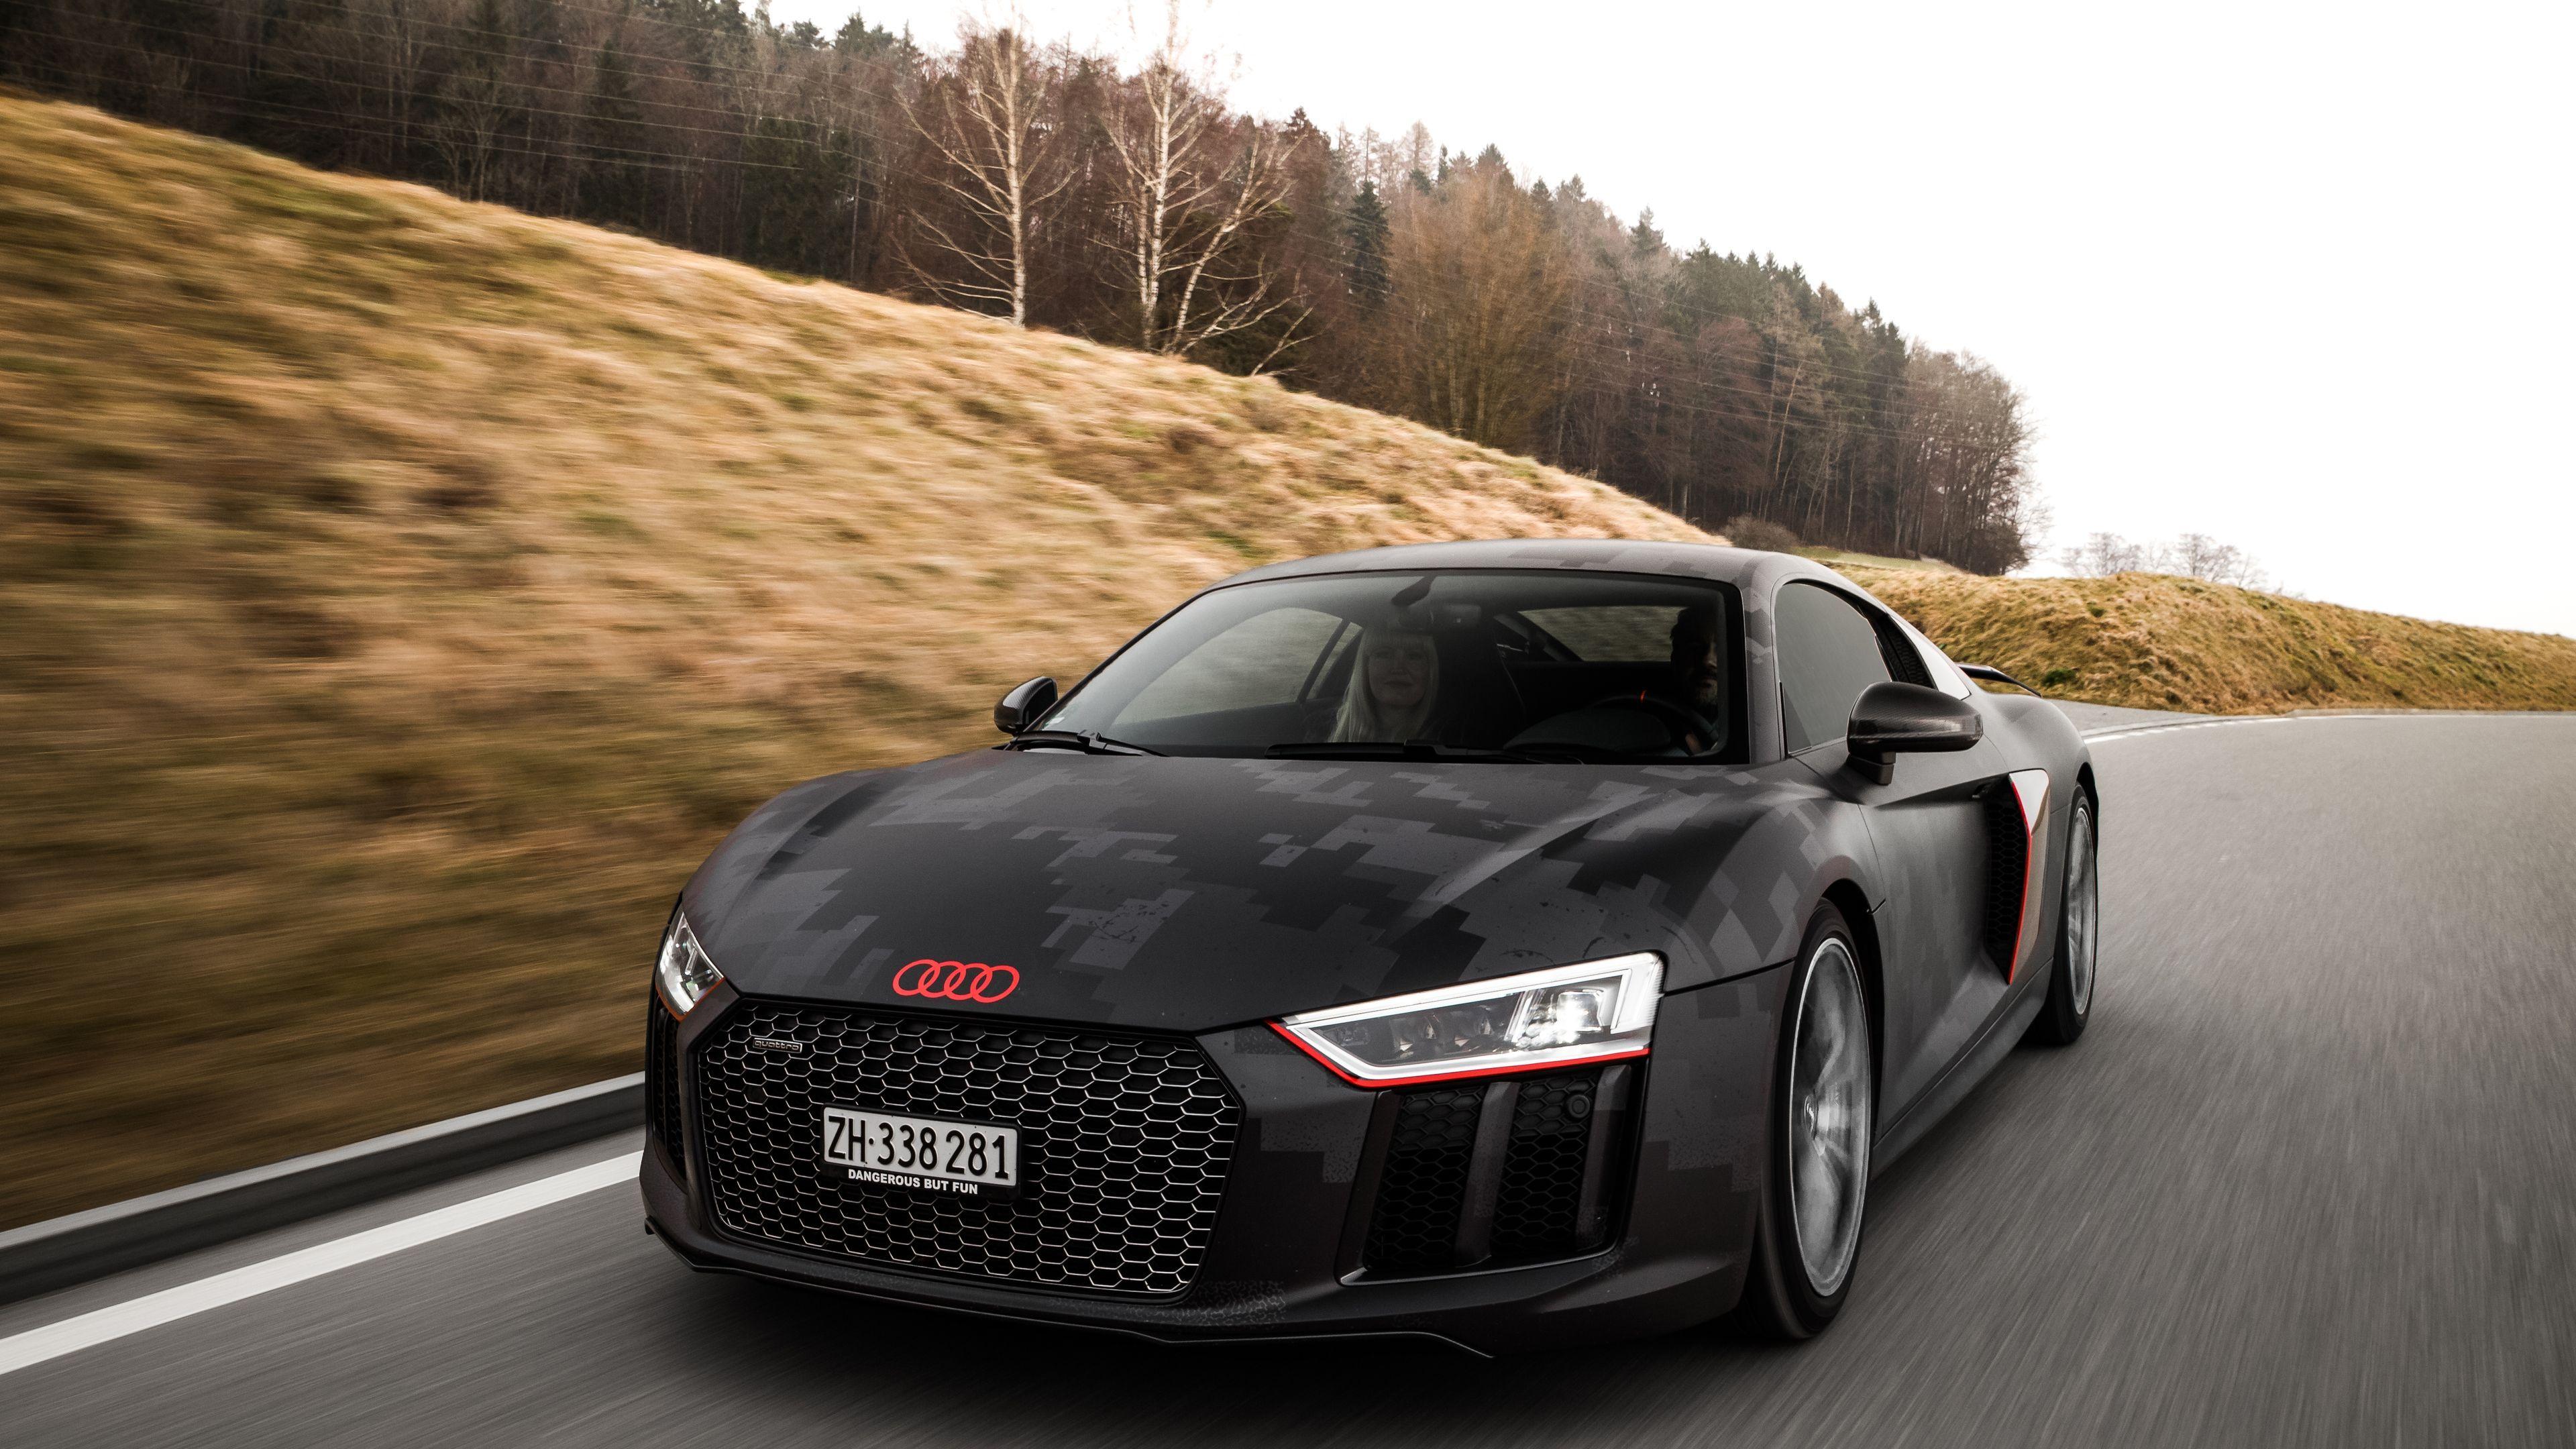 Audi R8 V10 Plus Wallpapers Top Free Audi R8 V10 Plus Backgrounds Wallpaperaccess